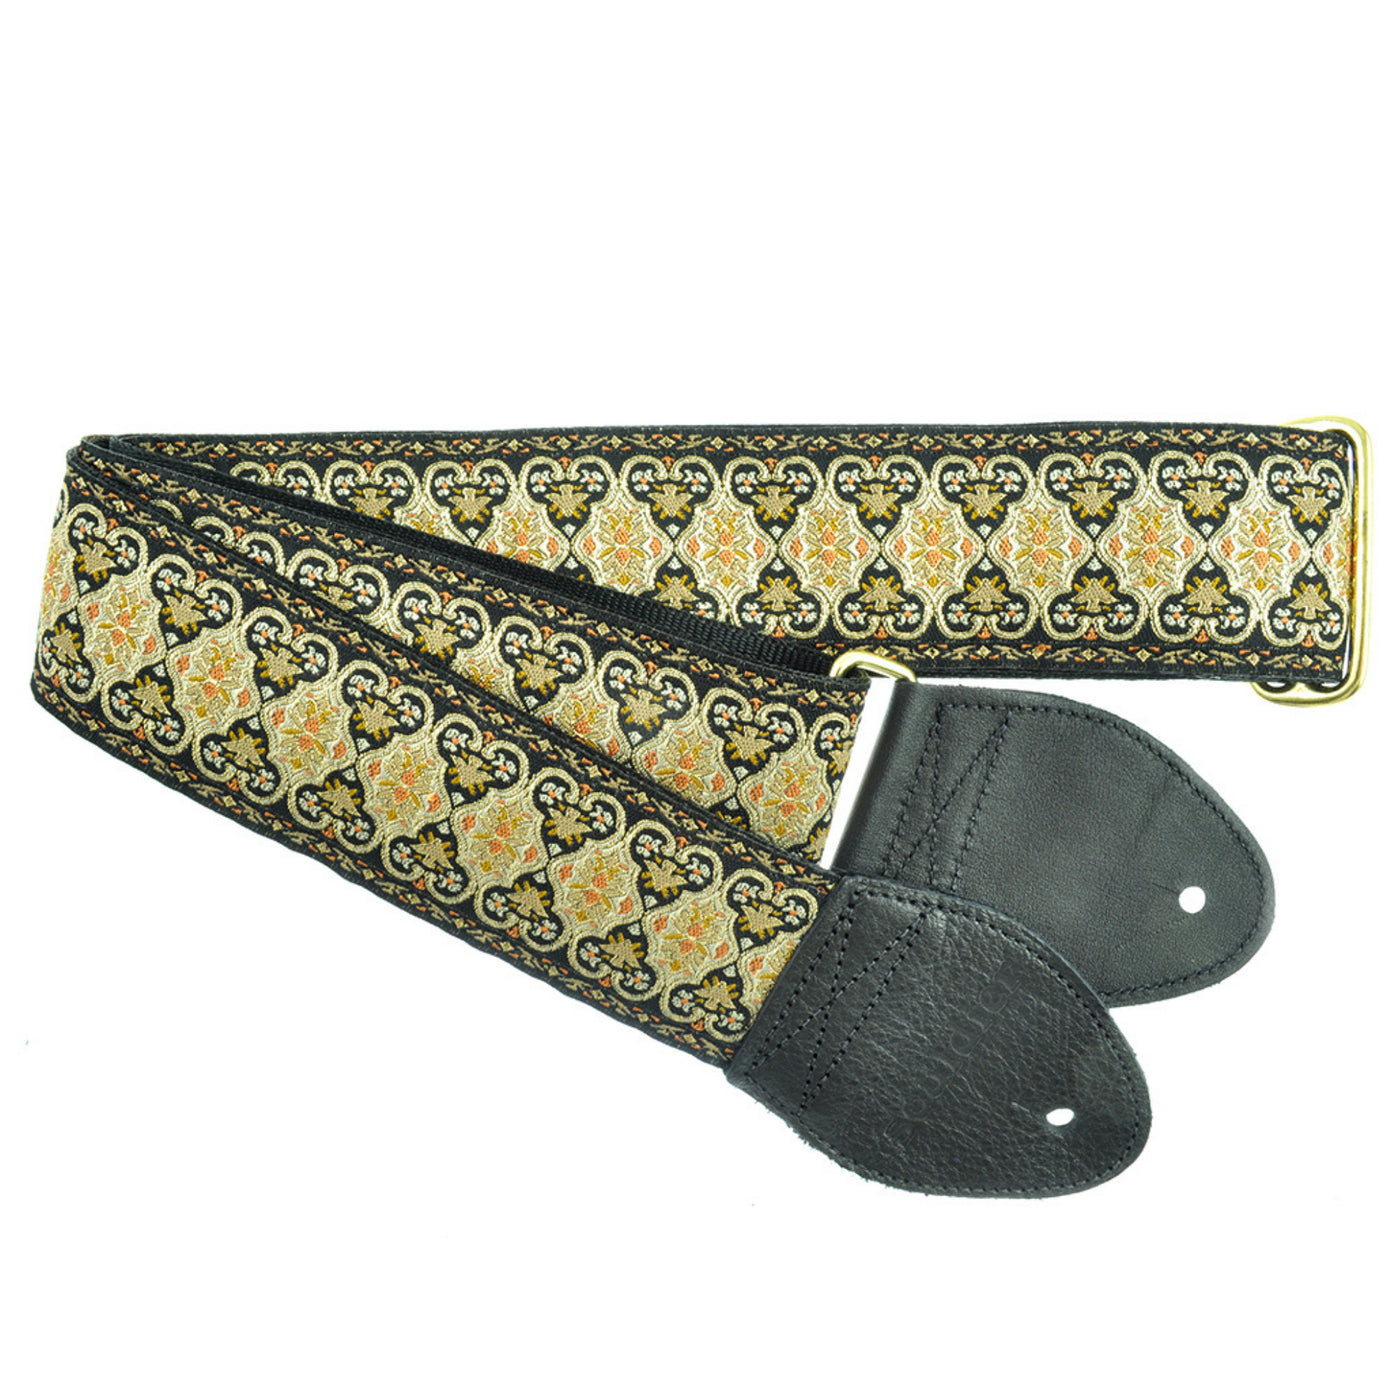 Souldier GS0112BK05BK - Handmade Seatbelt Guitar Strap for Bass, Electric or Acoustic Guitar, 2 Inches Wide and Adjustable Length from 30" to 63"  Made in the USA, Persian, Black